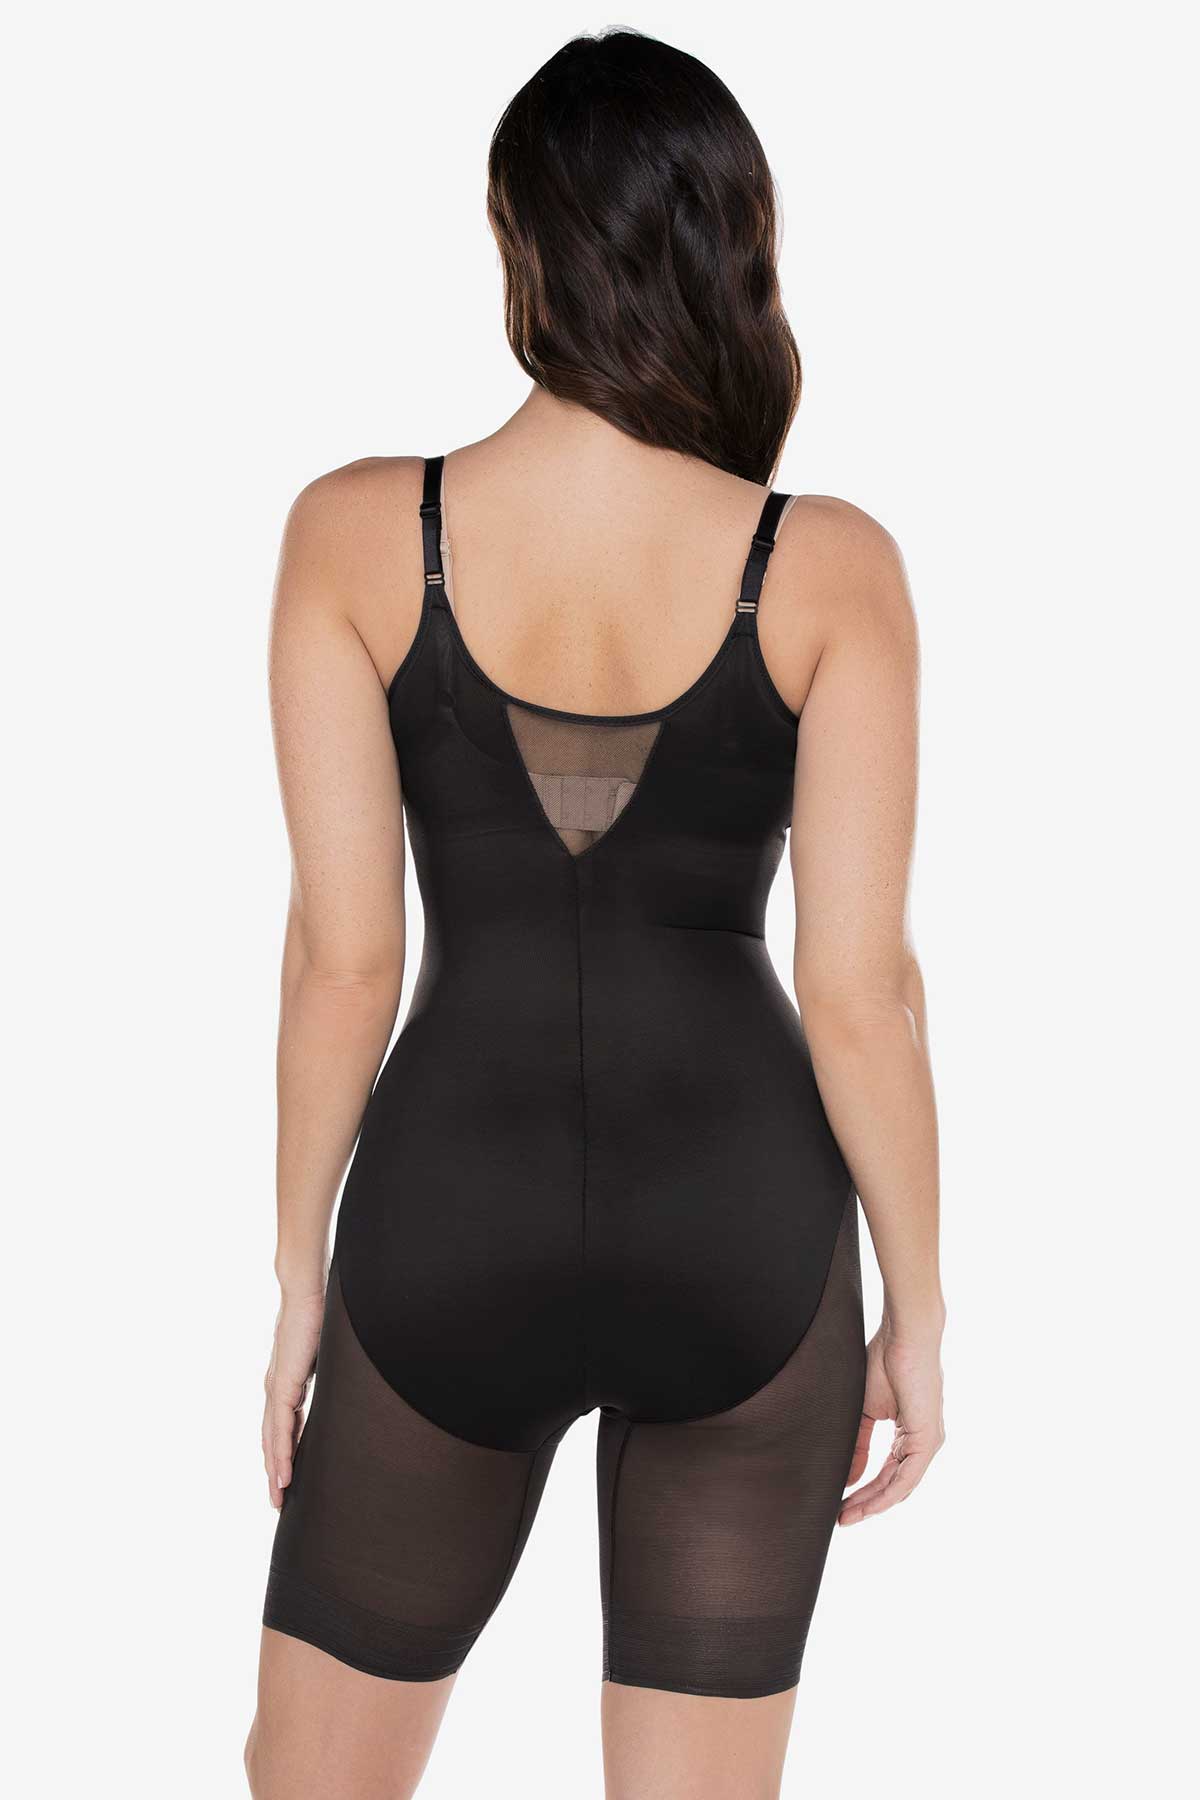 Get the Perfect Figure with Miracle Suit TC Shapewear at Petticoat Lane